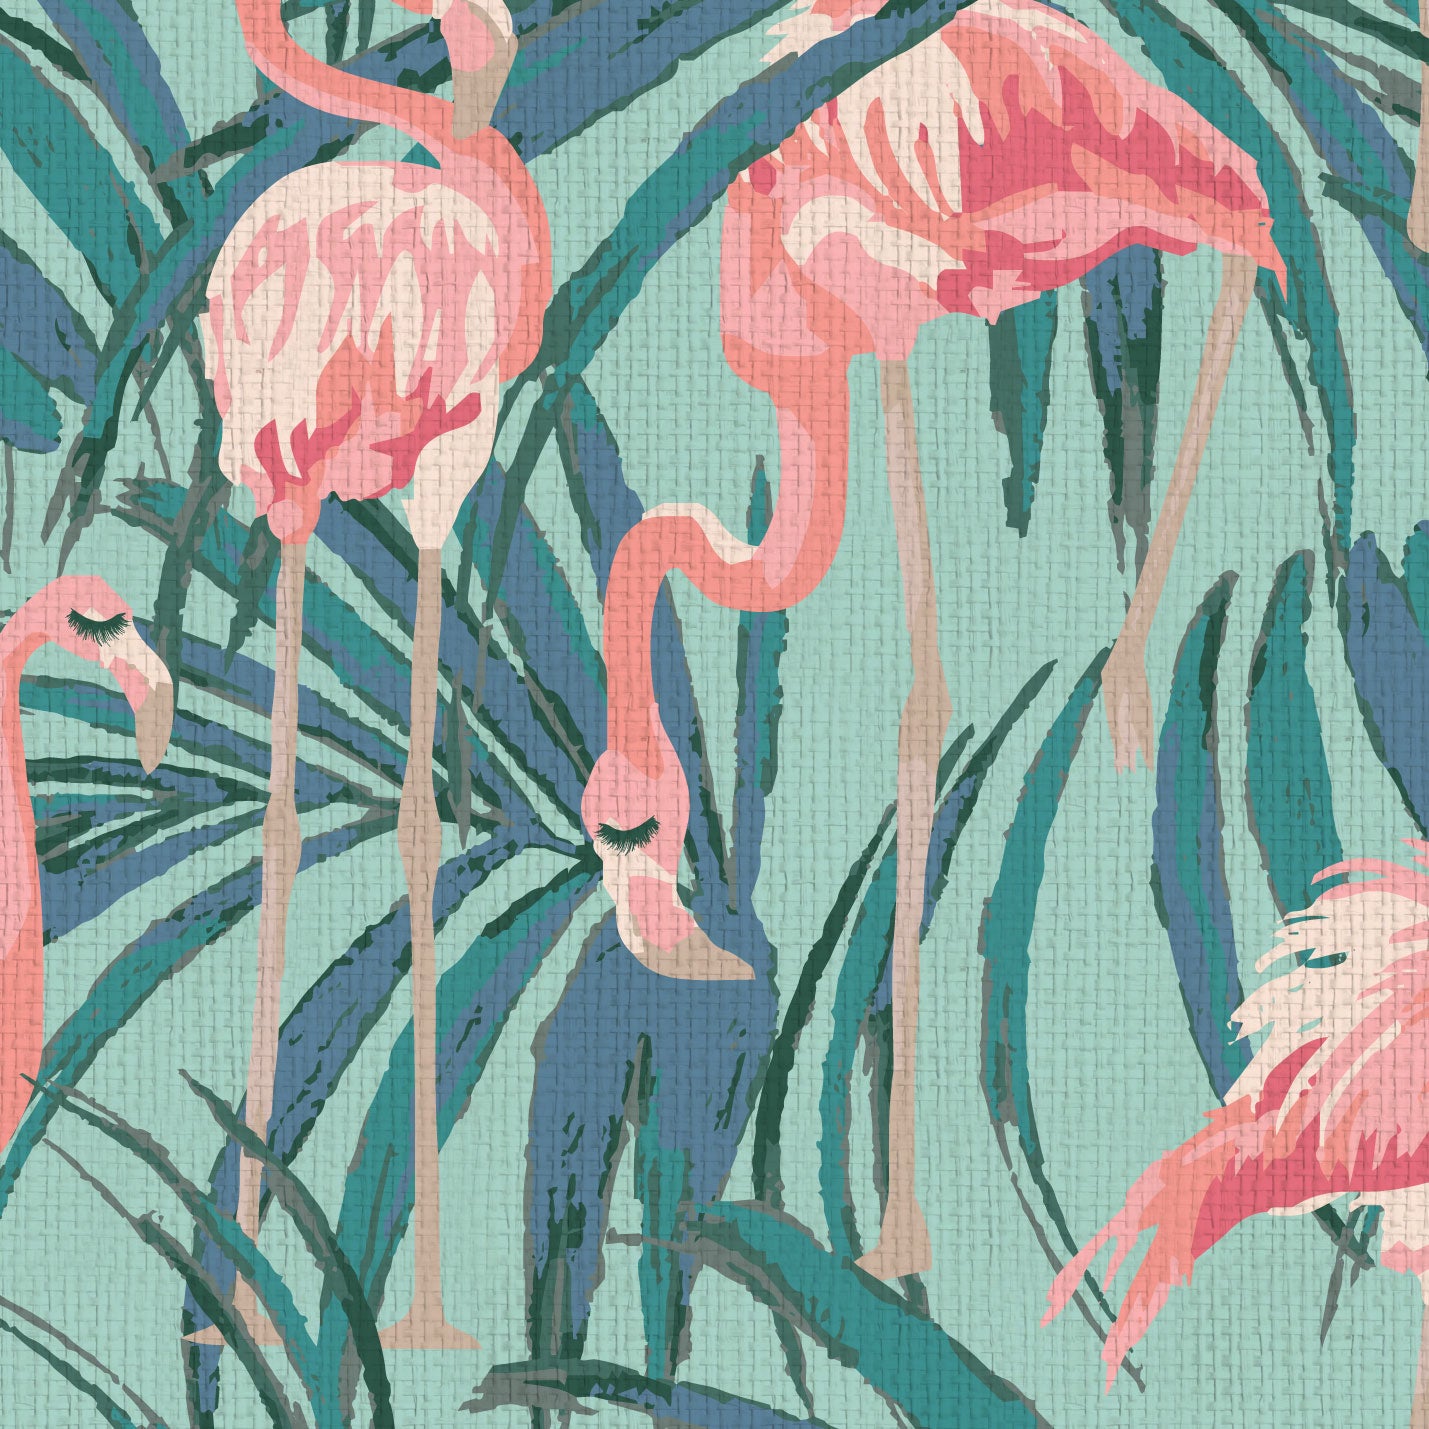 light blue teal printed paper weave wallpaper with oversized palm leaves layered with extra large flamingos in shades of pink luscious eyelashes brow beauty bar medspa salon Grasscloth Natural Textured Eco-Friendly Non-toxic High-quality Sustainable practices Sustainability Interior Design Wall covering Bold Wallpaper Custom Tailor-made Retro chic Tropical Beauty Hair Garden jungle Seaside Coastal Seashore Waterfront Vacation home styling Retreat Relaxed Beach cottage animal bird palm leaf tree